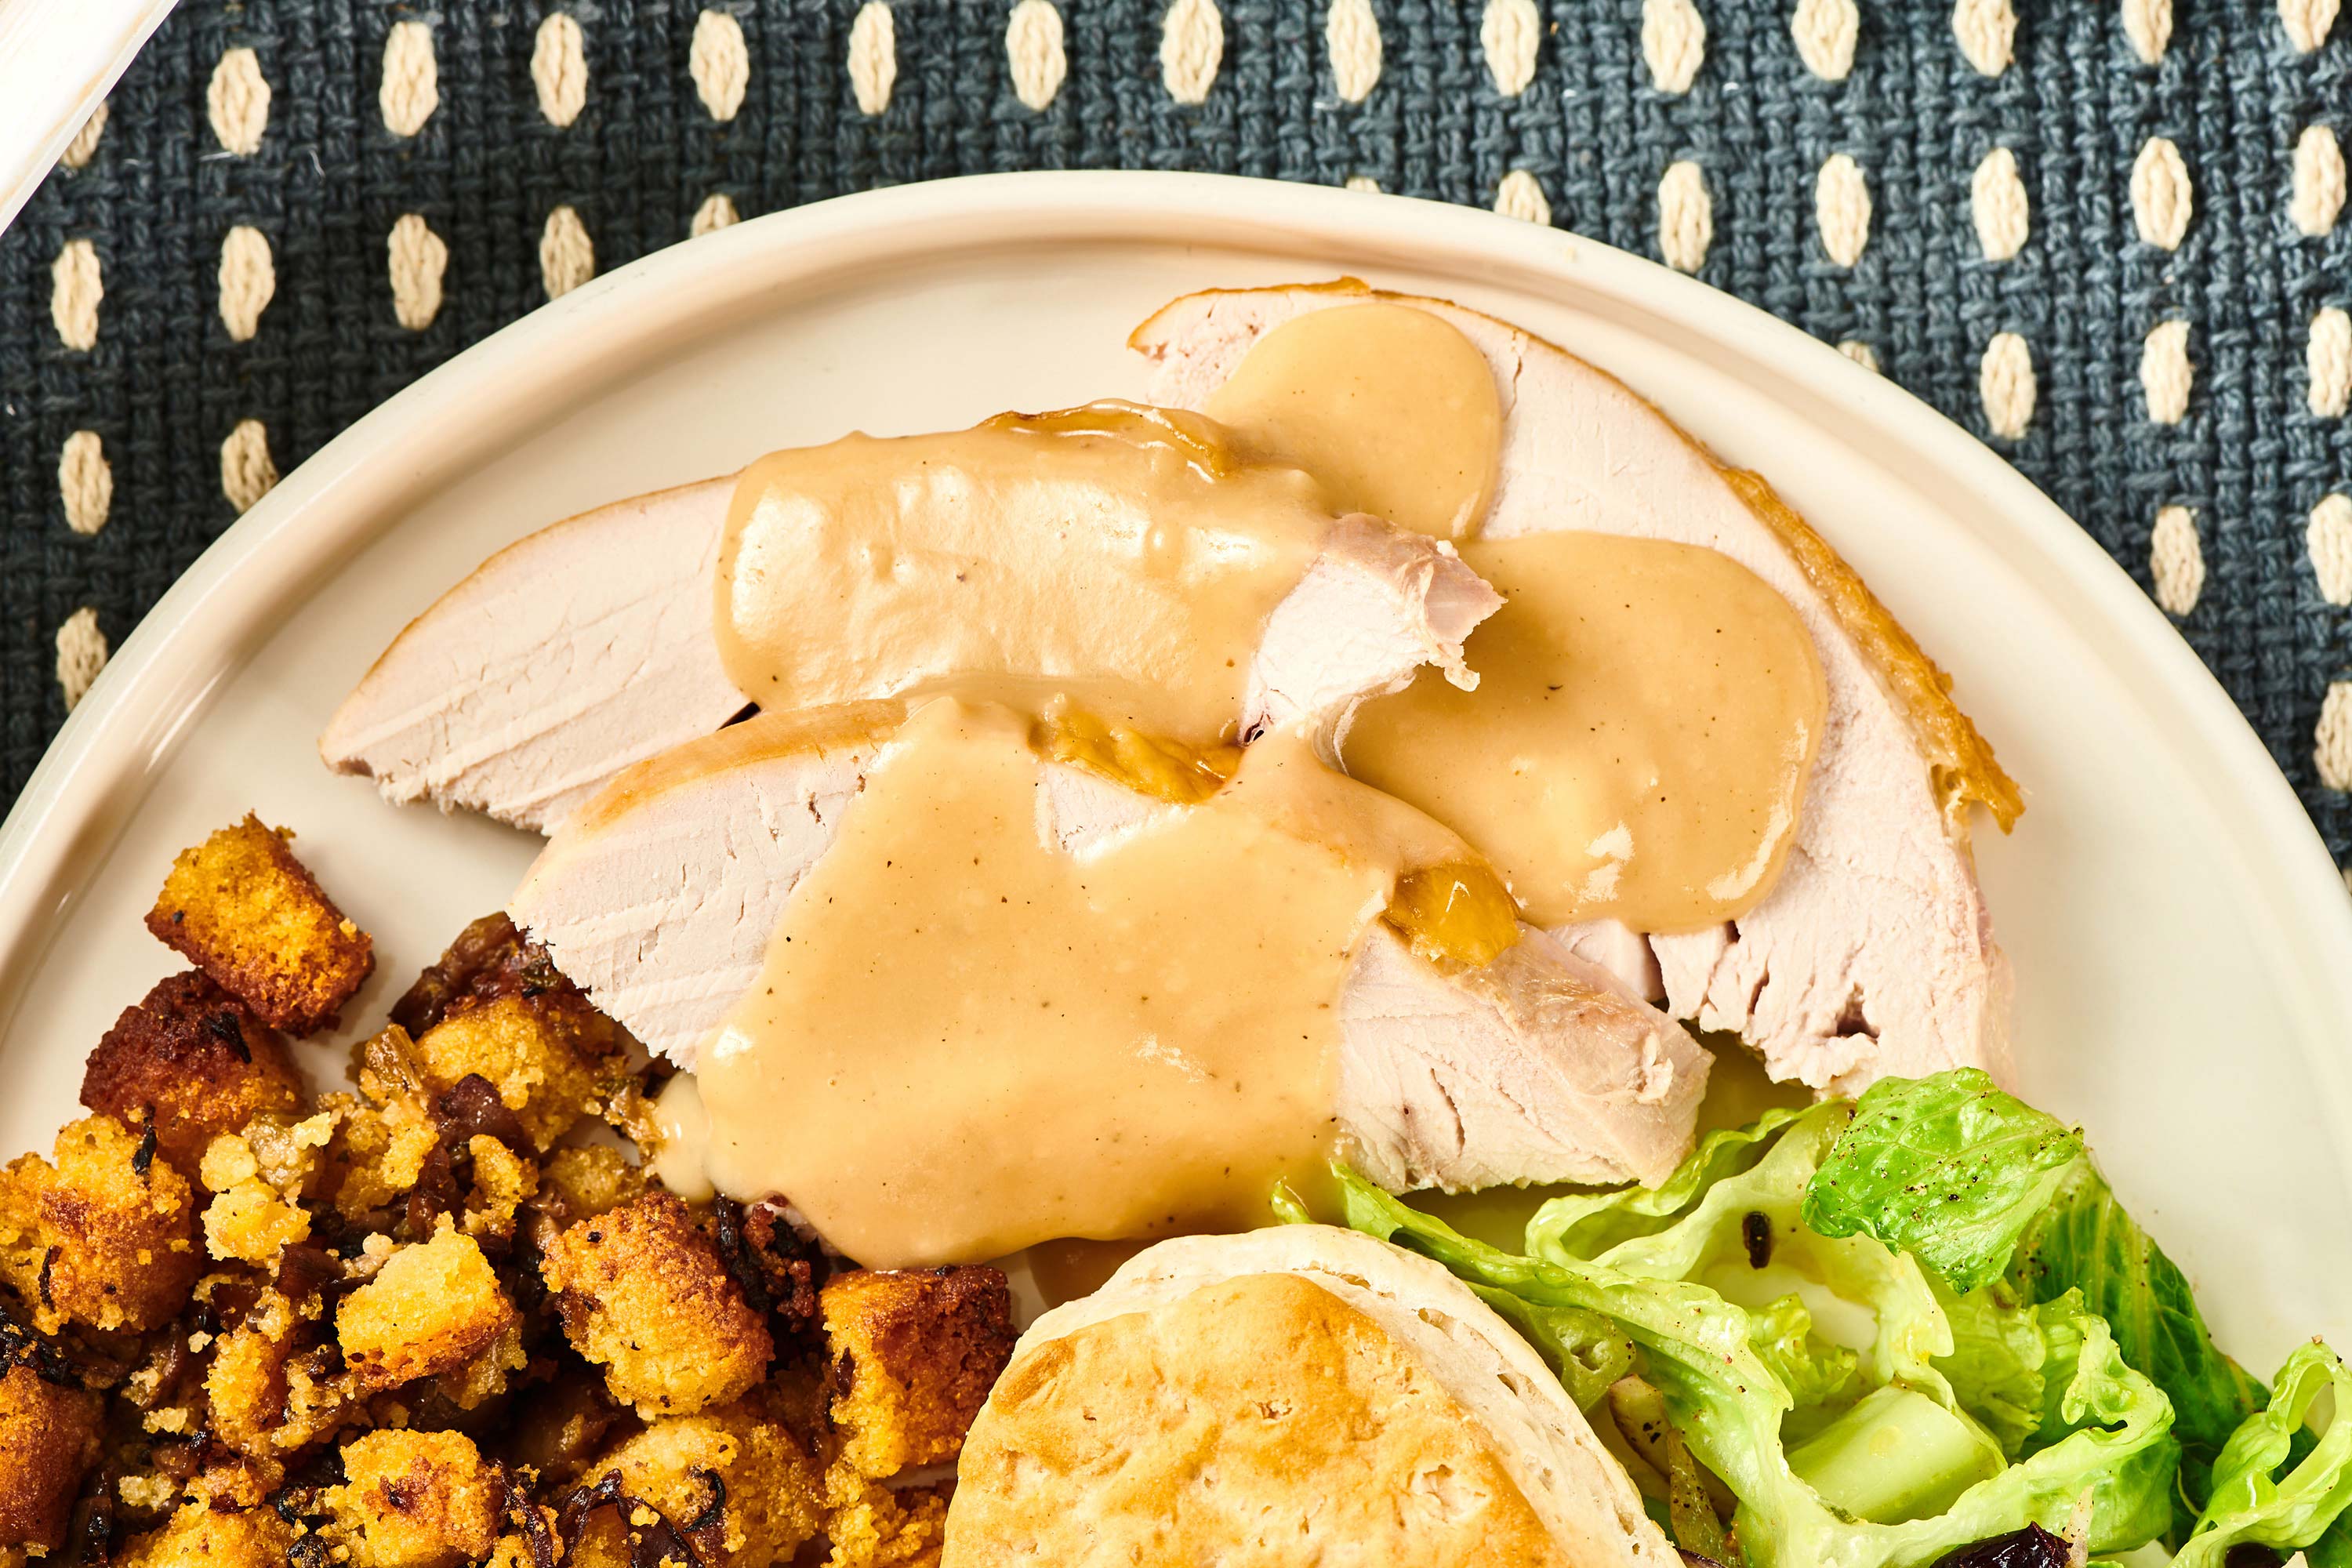 Slices of turkey topped with gravy.